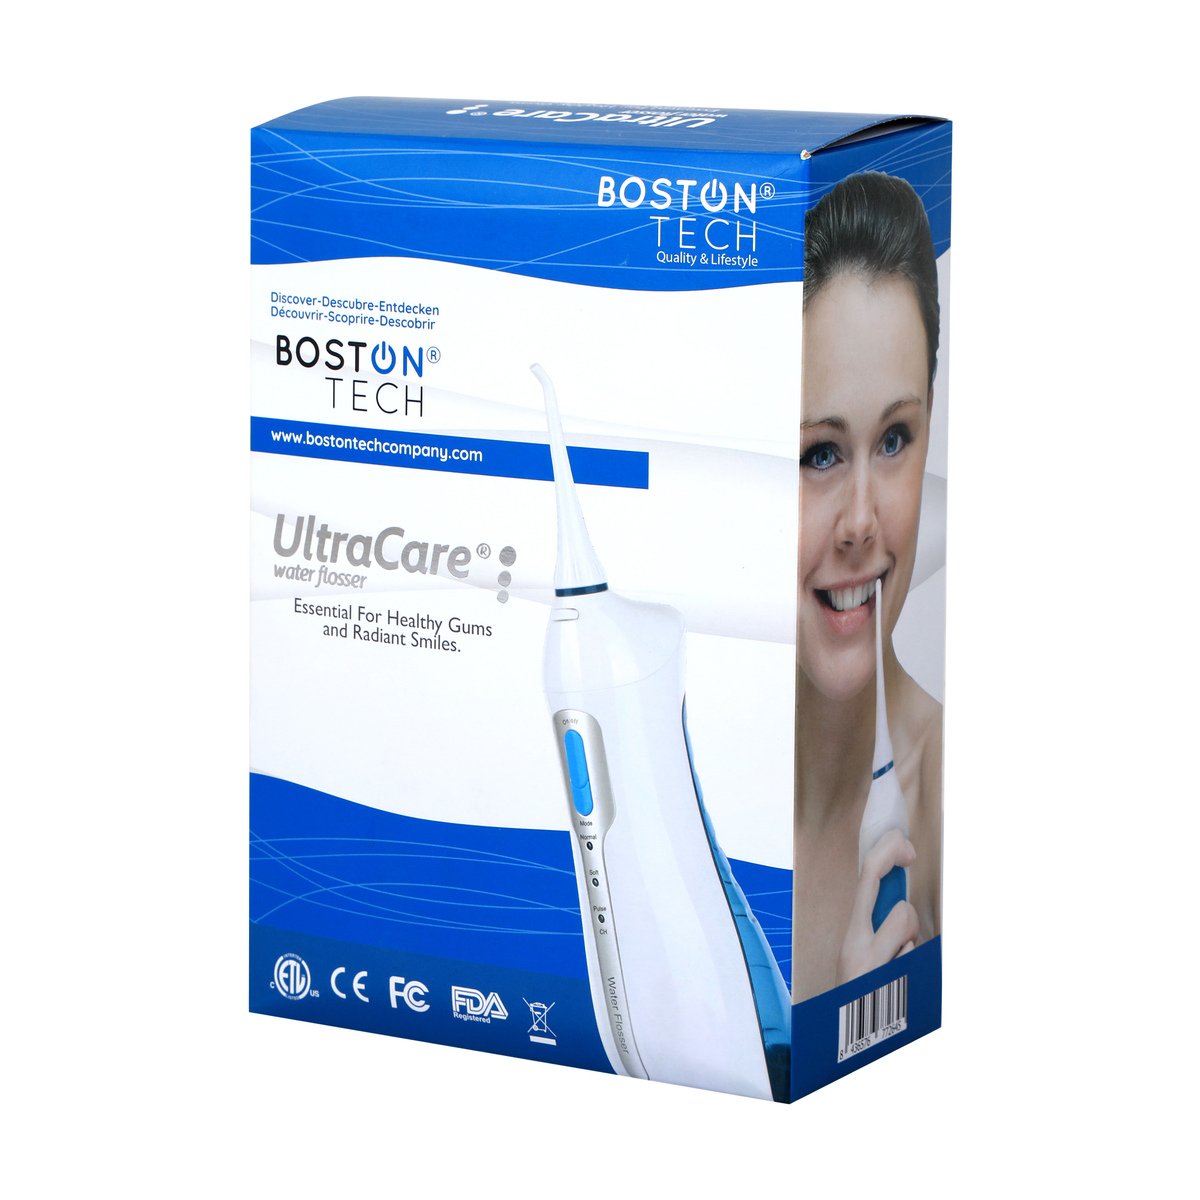 Boston Tech Ultra Care Wataer Flosser- Essential For Heathy Gums and Radiant Smiles